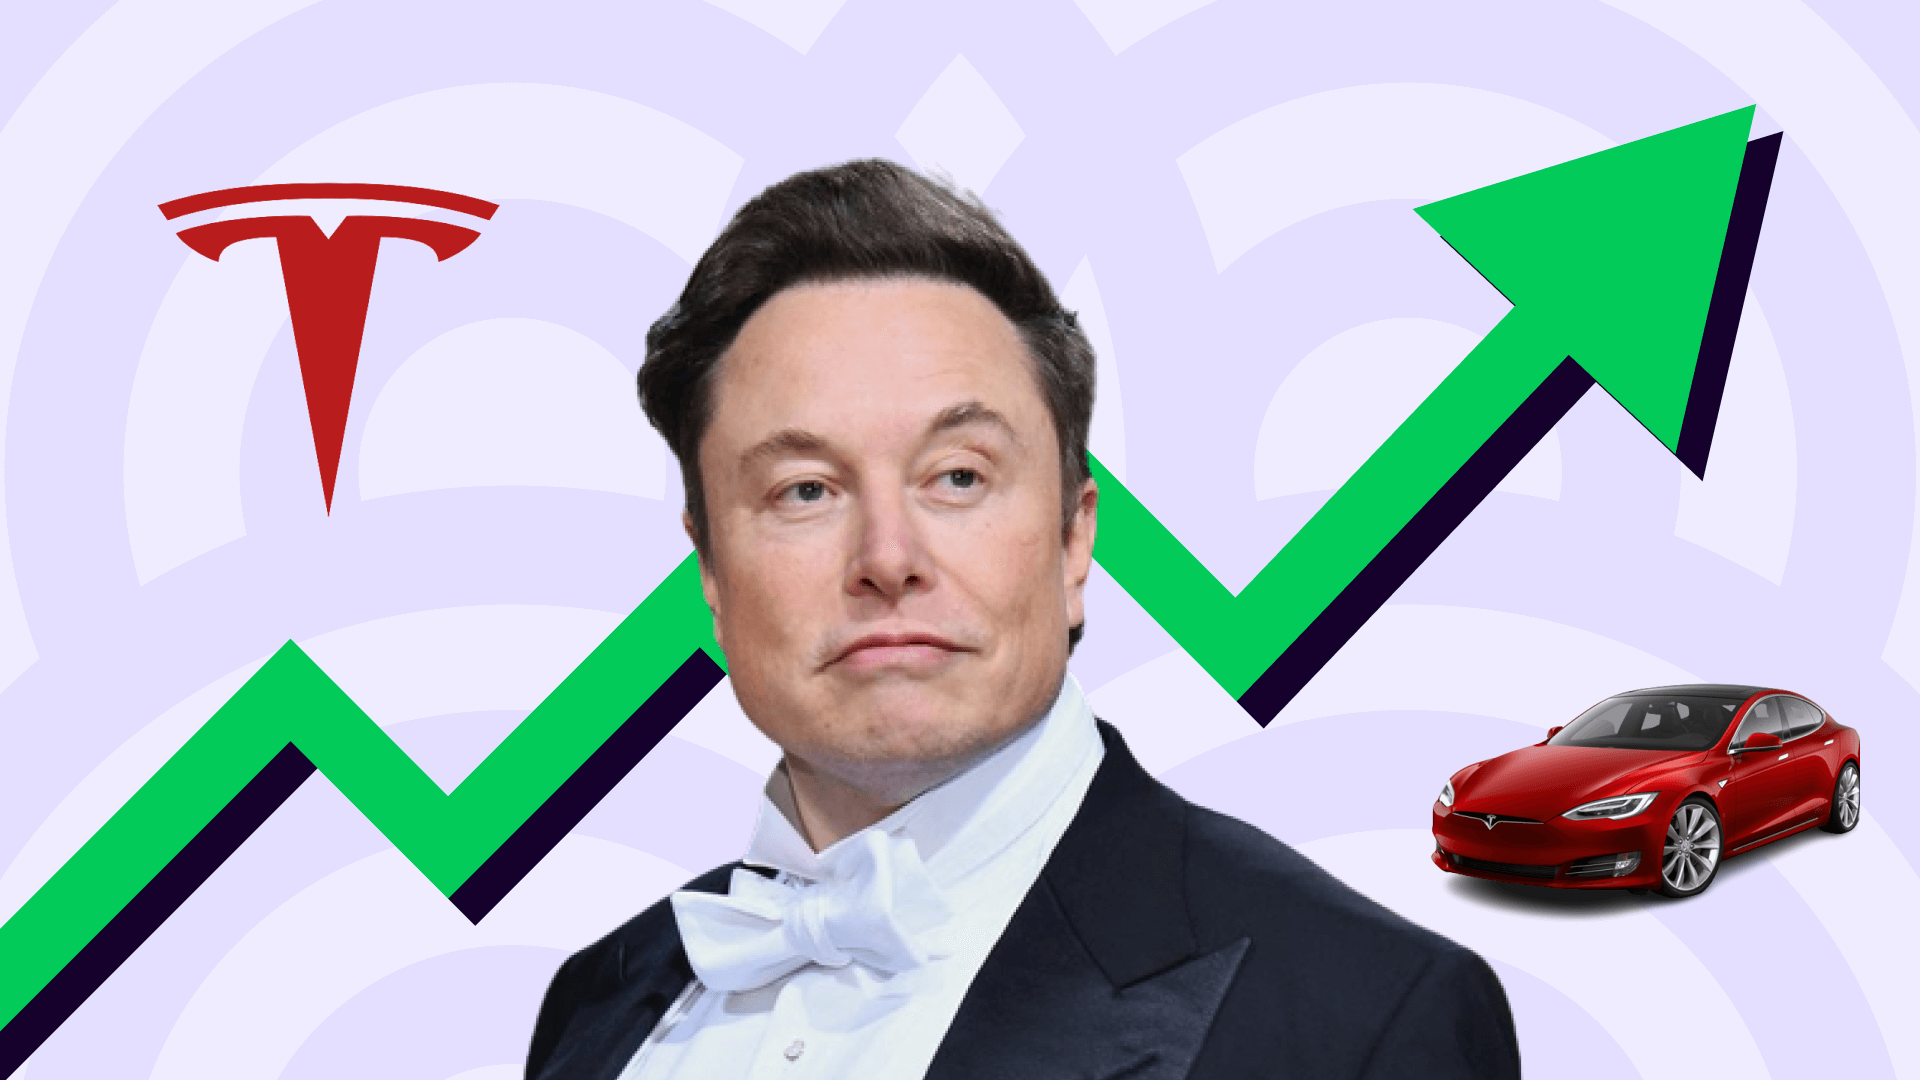 Elon Musk and Tesla's Q4 2022 earning results report